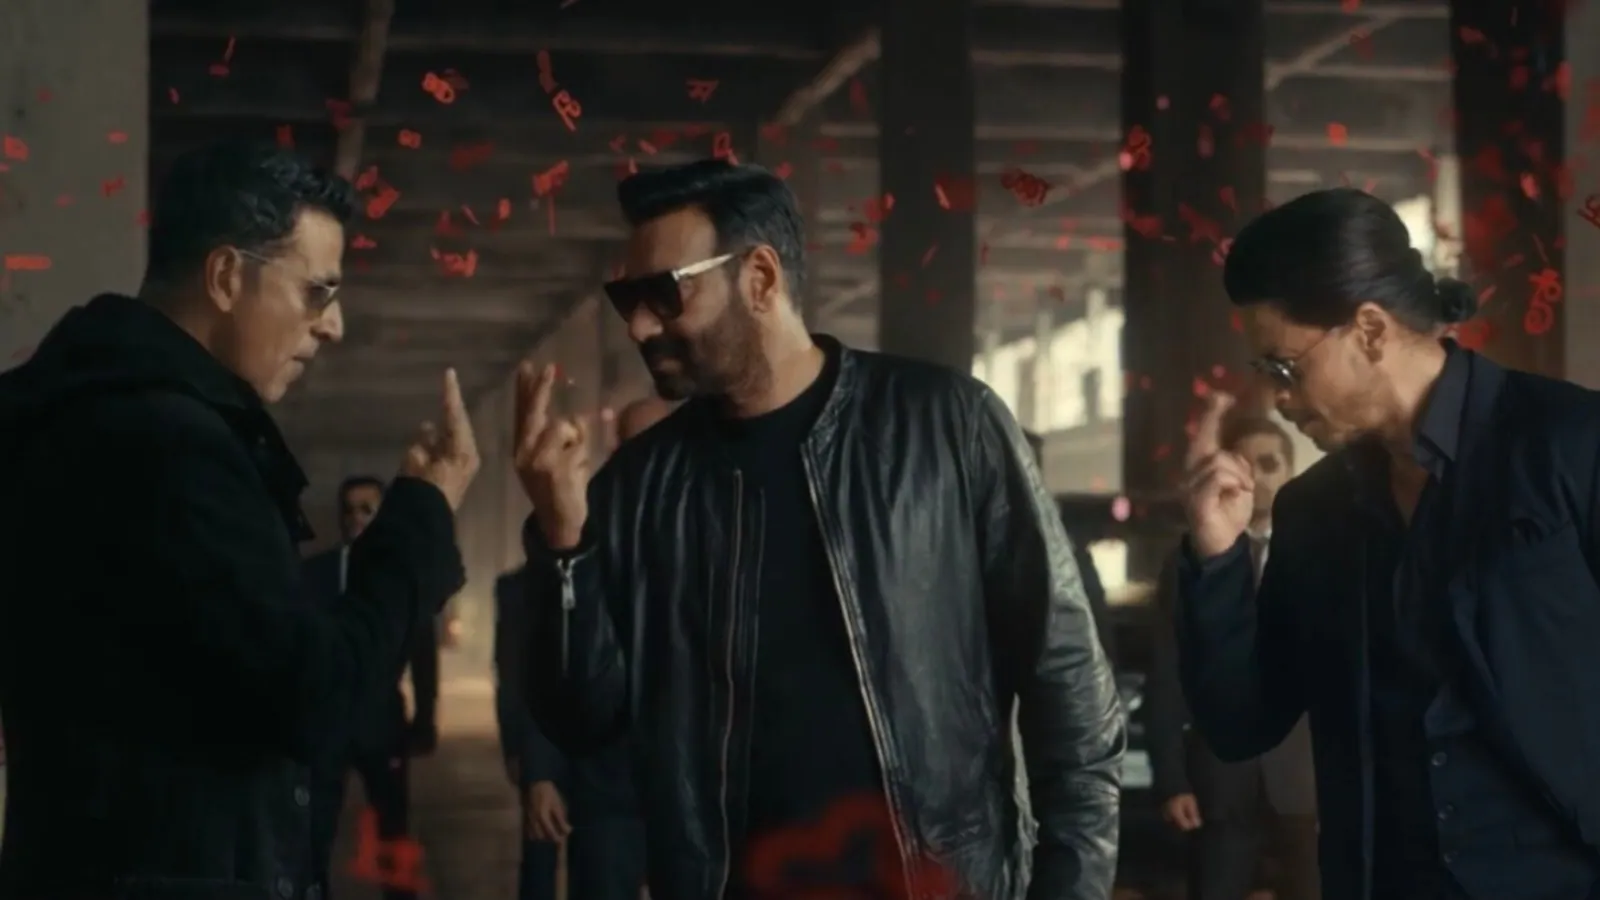 Shah Rukh Khan, Ajay Devgn welcome Akshay Kumar into their Vimal gang with new ad video. Watch